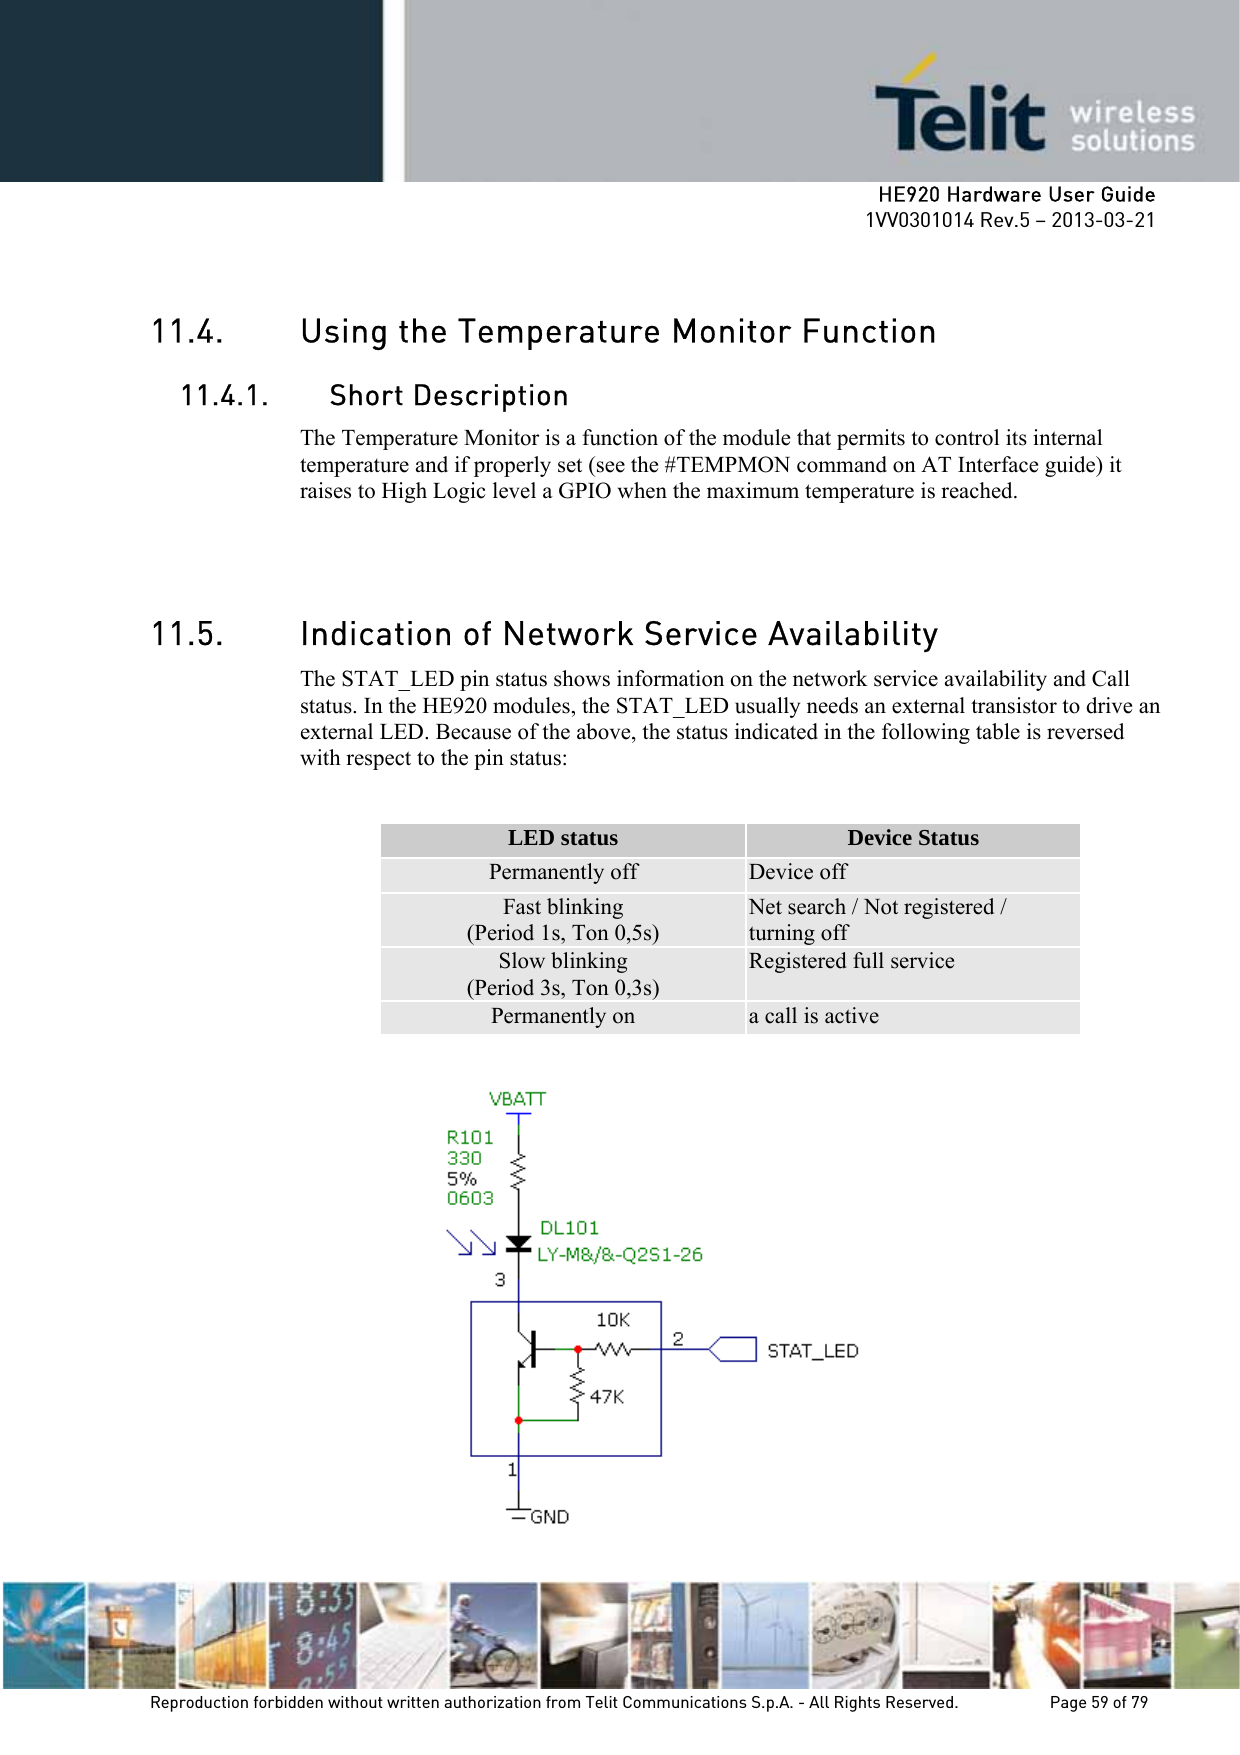     HE920 Hardware User Guide 1VV0301014 Rev.5 – 2013-03-21 Reproduction forbidden without written authorization from Telit Communications S.p.A. - All Rights Reserved.    Page 59 of 79   11.4. Using the Temperature Monitor Function 11.4.1. Short Description The Temperature Monitor is a function of the module that permits to control its internal temperature and if properly set (see the #TEMPMON command on AT Interface guide) it raises to High Logic level a GPIO when the maximum temperature is reached.   11.5. Indication of Network Service Availability The STAT_LED pin status shows information on the network service availability and Call status. In the HE920 modules, the STAT_LED usually needs an external transistor to drive an external LED. Because of the above, the status indicated in the following table is reversed with respect to the pin status:  LED status  Device Status Permanently off  Device off Fast blinking (Period 1s, Ton 0,5s) Net search / Not registered / turning off Slow blinking (Period 3s, Ton 0,3s) Registered full service Permanently on  a call is active           